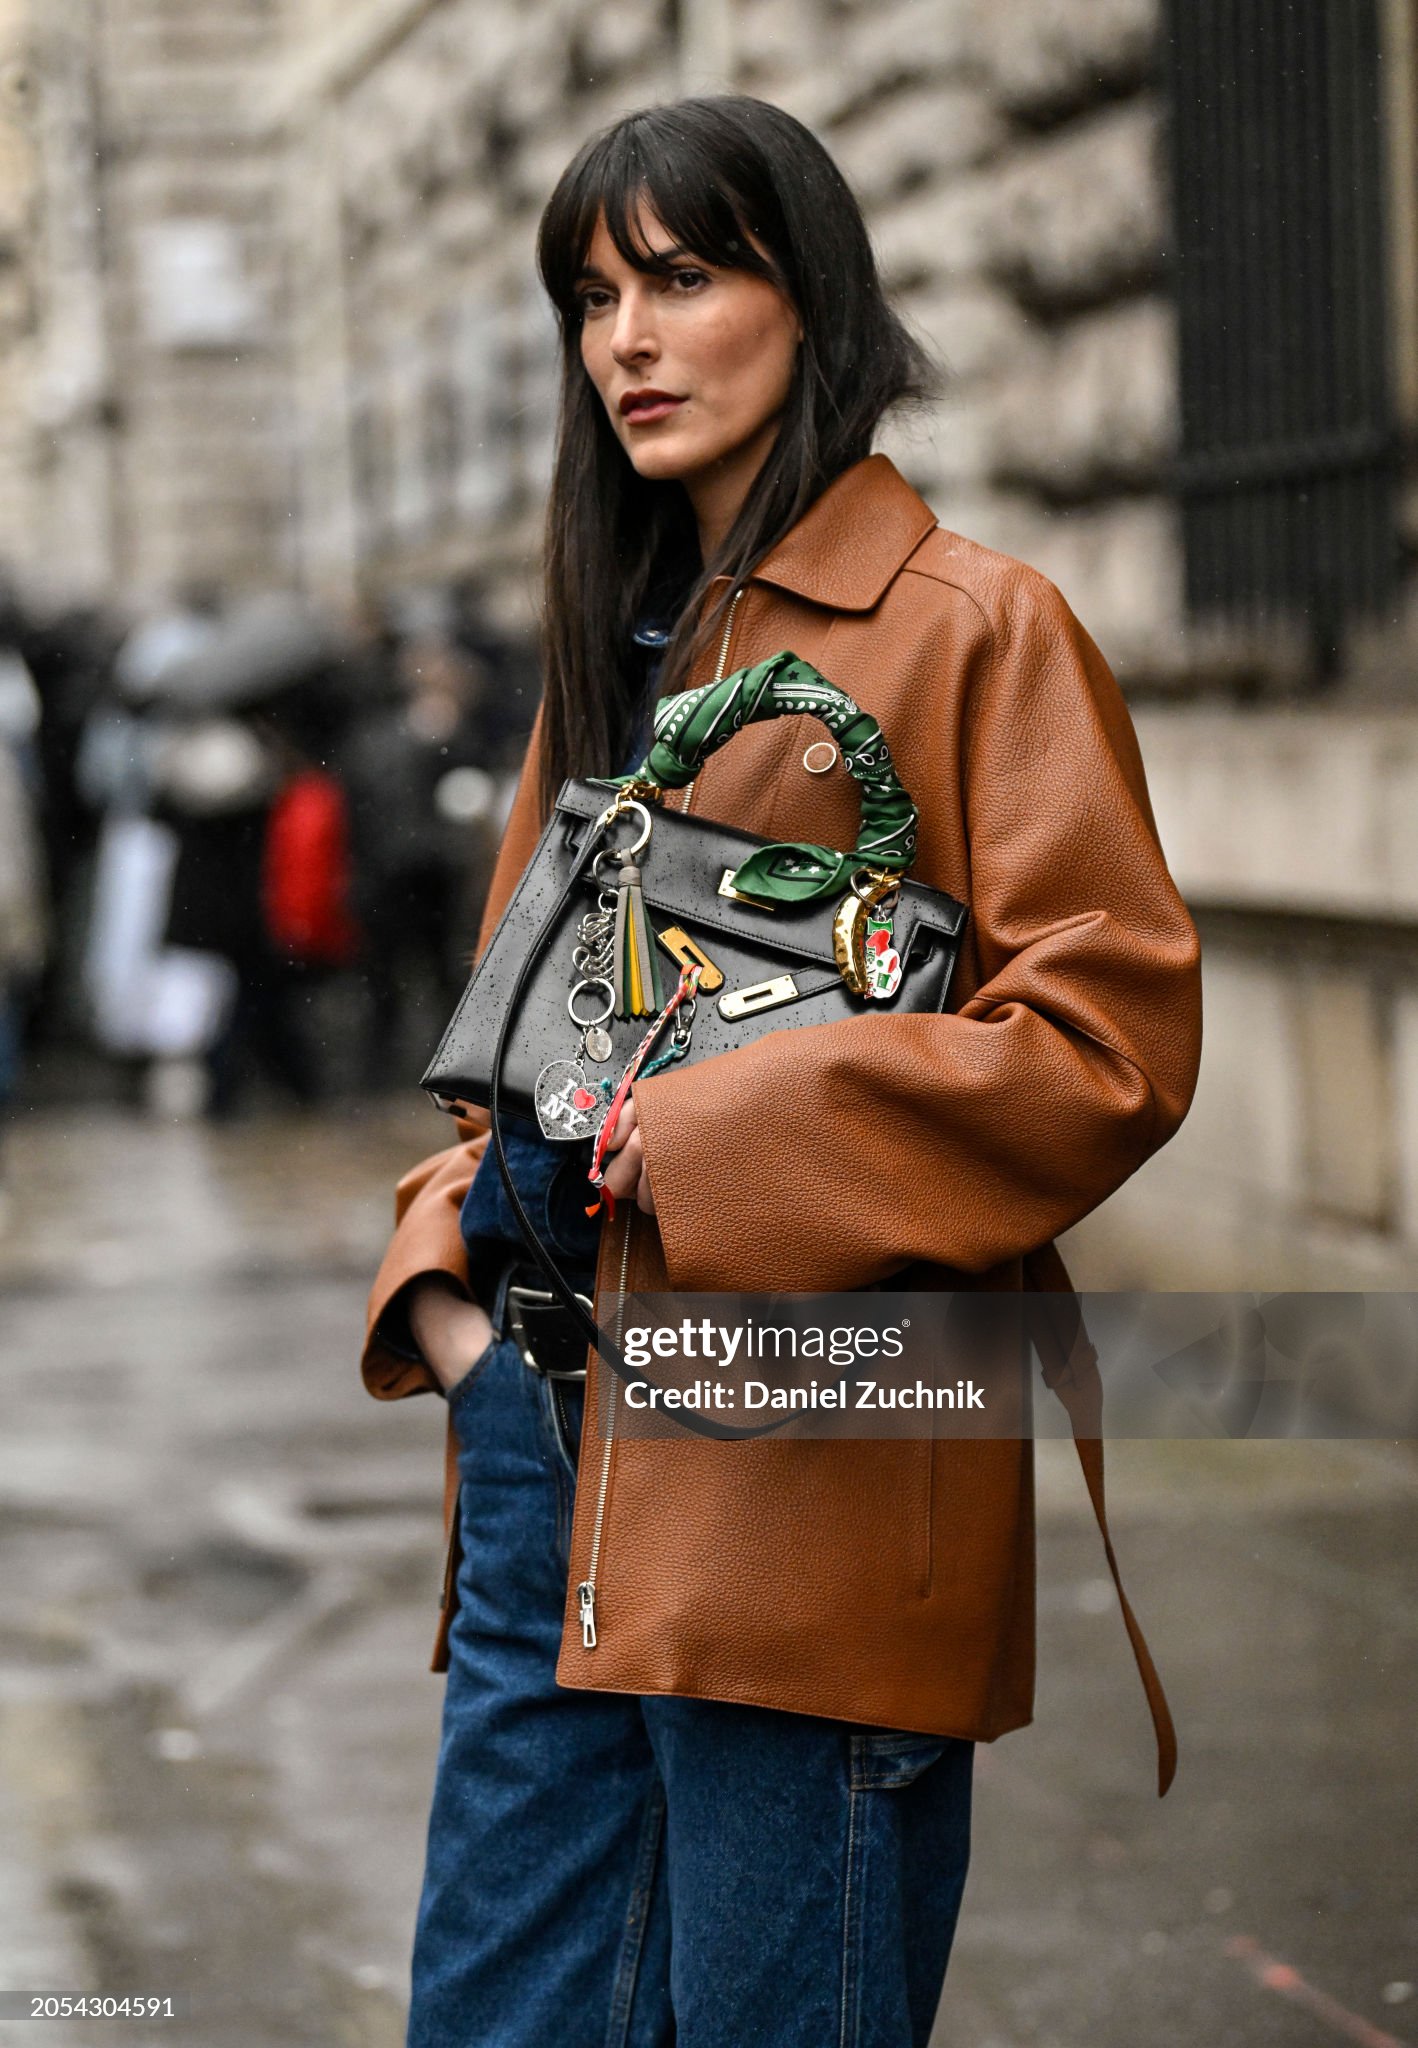 paris-france-leia-sfez-is-seen-wearing-a-brown-leather-hermes-jacket-blue-jeans-and-hermes.jpg